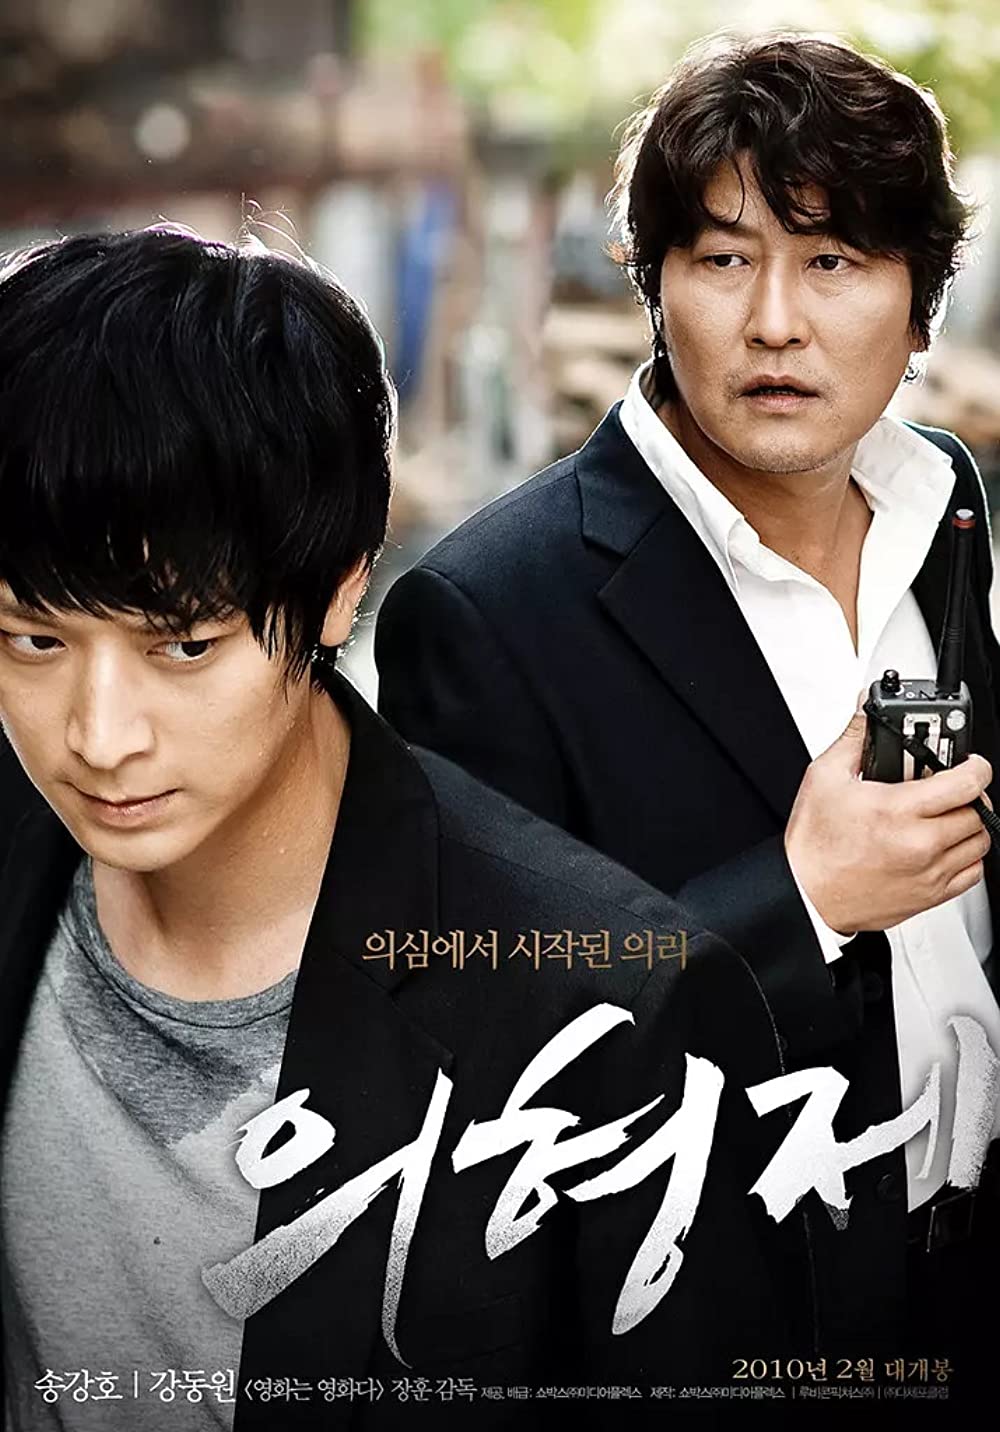 Download Ui-hyeong-je Movie | Ui-hyeong-je